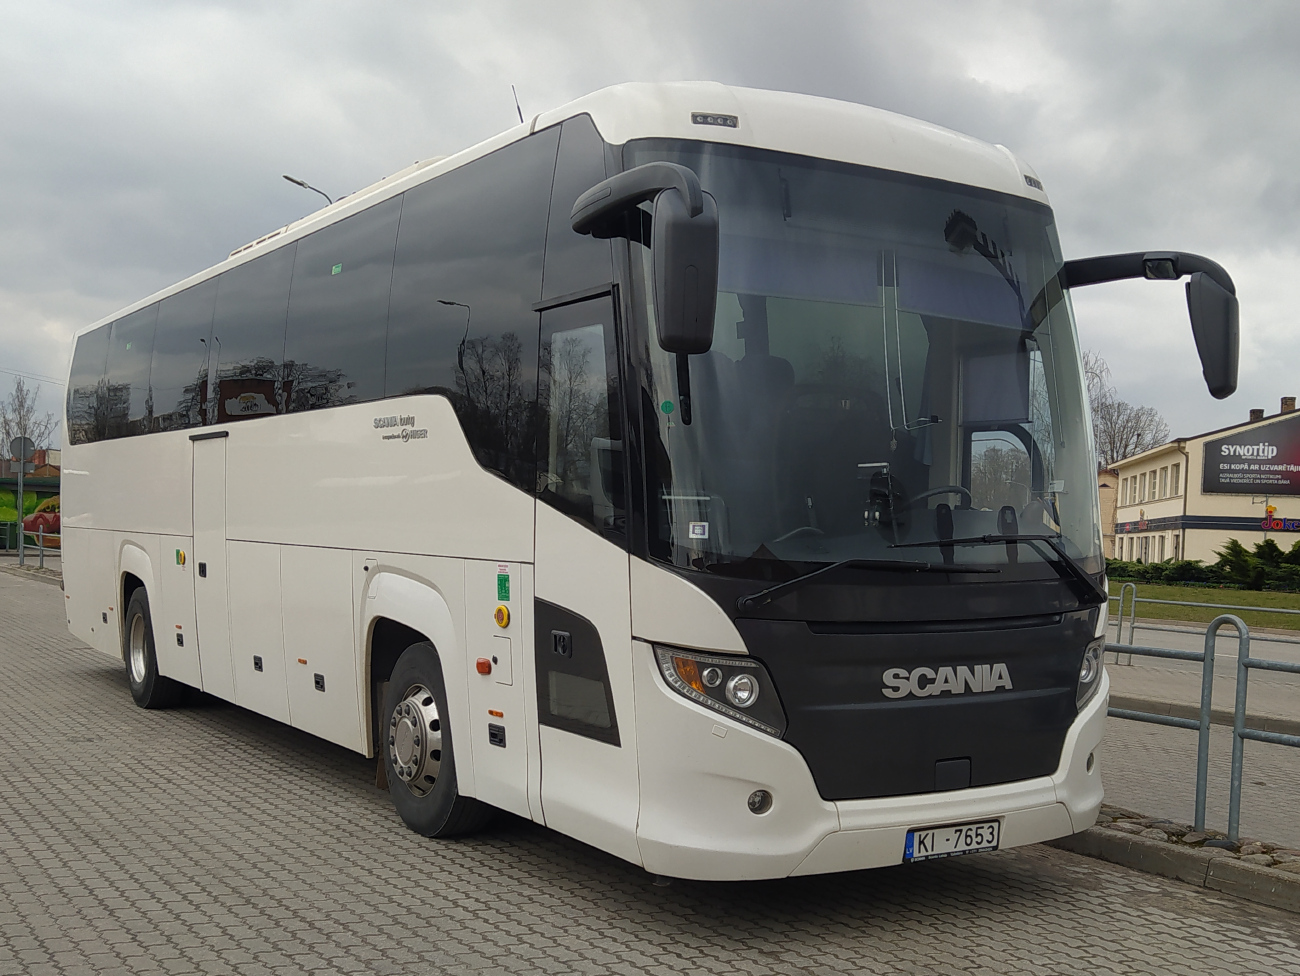 Valmiera, Scania Touring HD (Higer A80T) # 7653